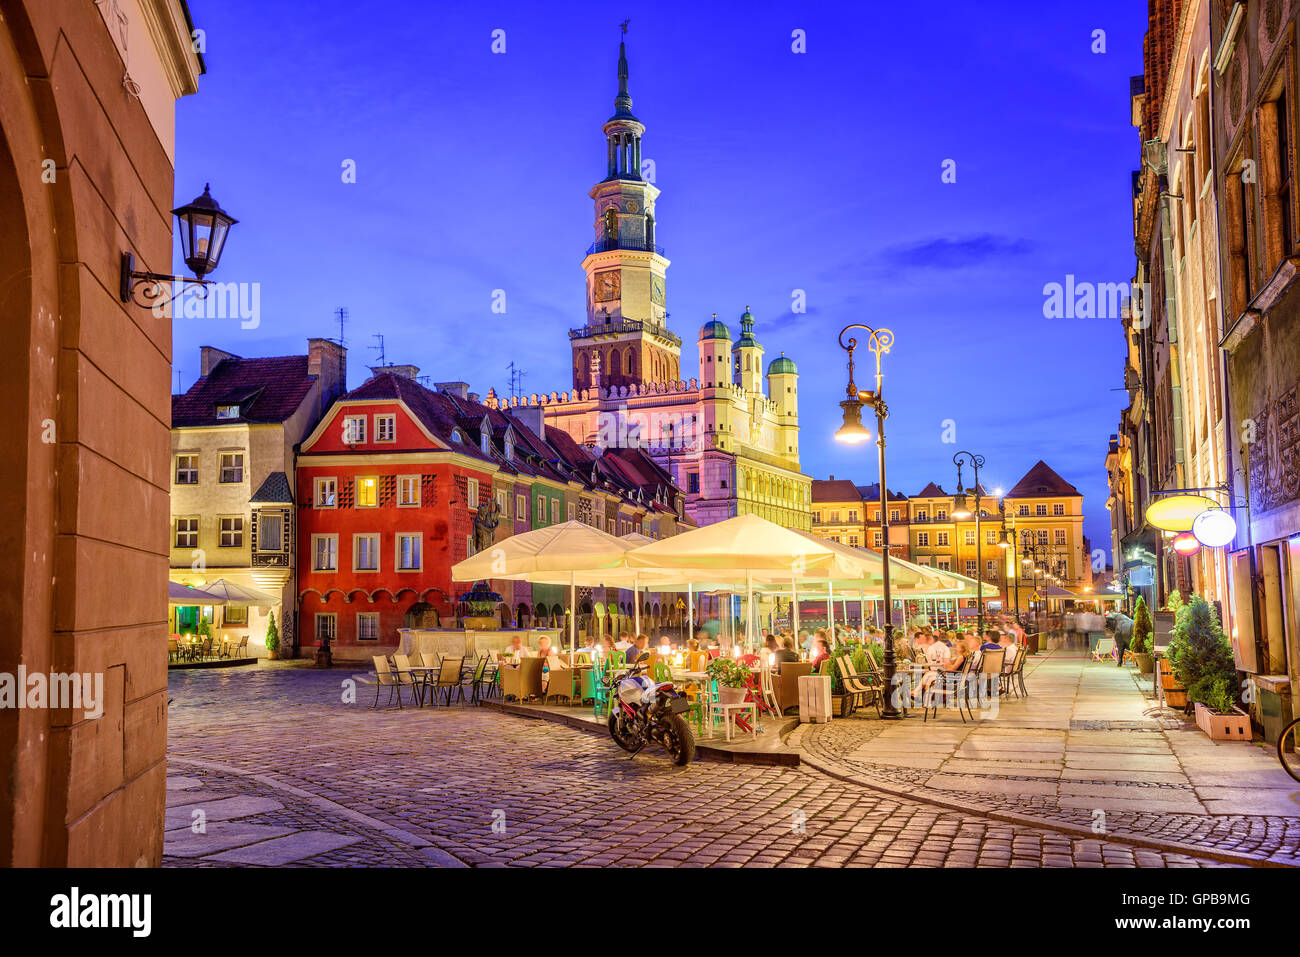 Main square of the old town of Poznan, Poland on a summer day evening. Stock Photo